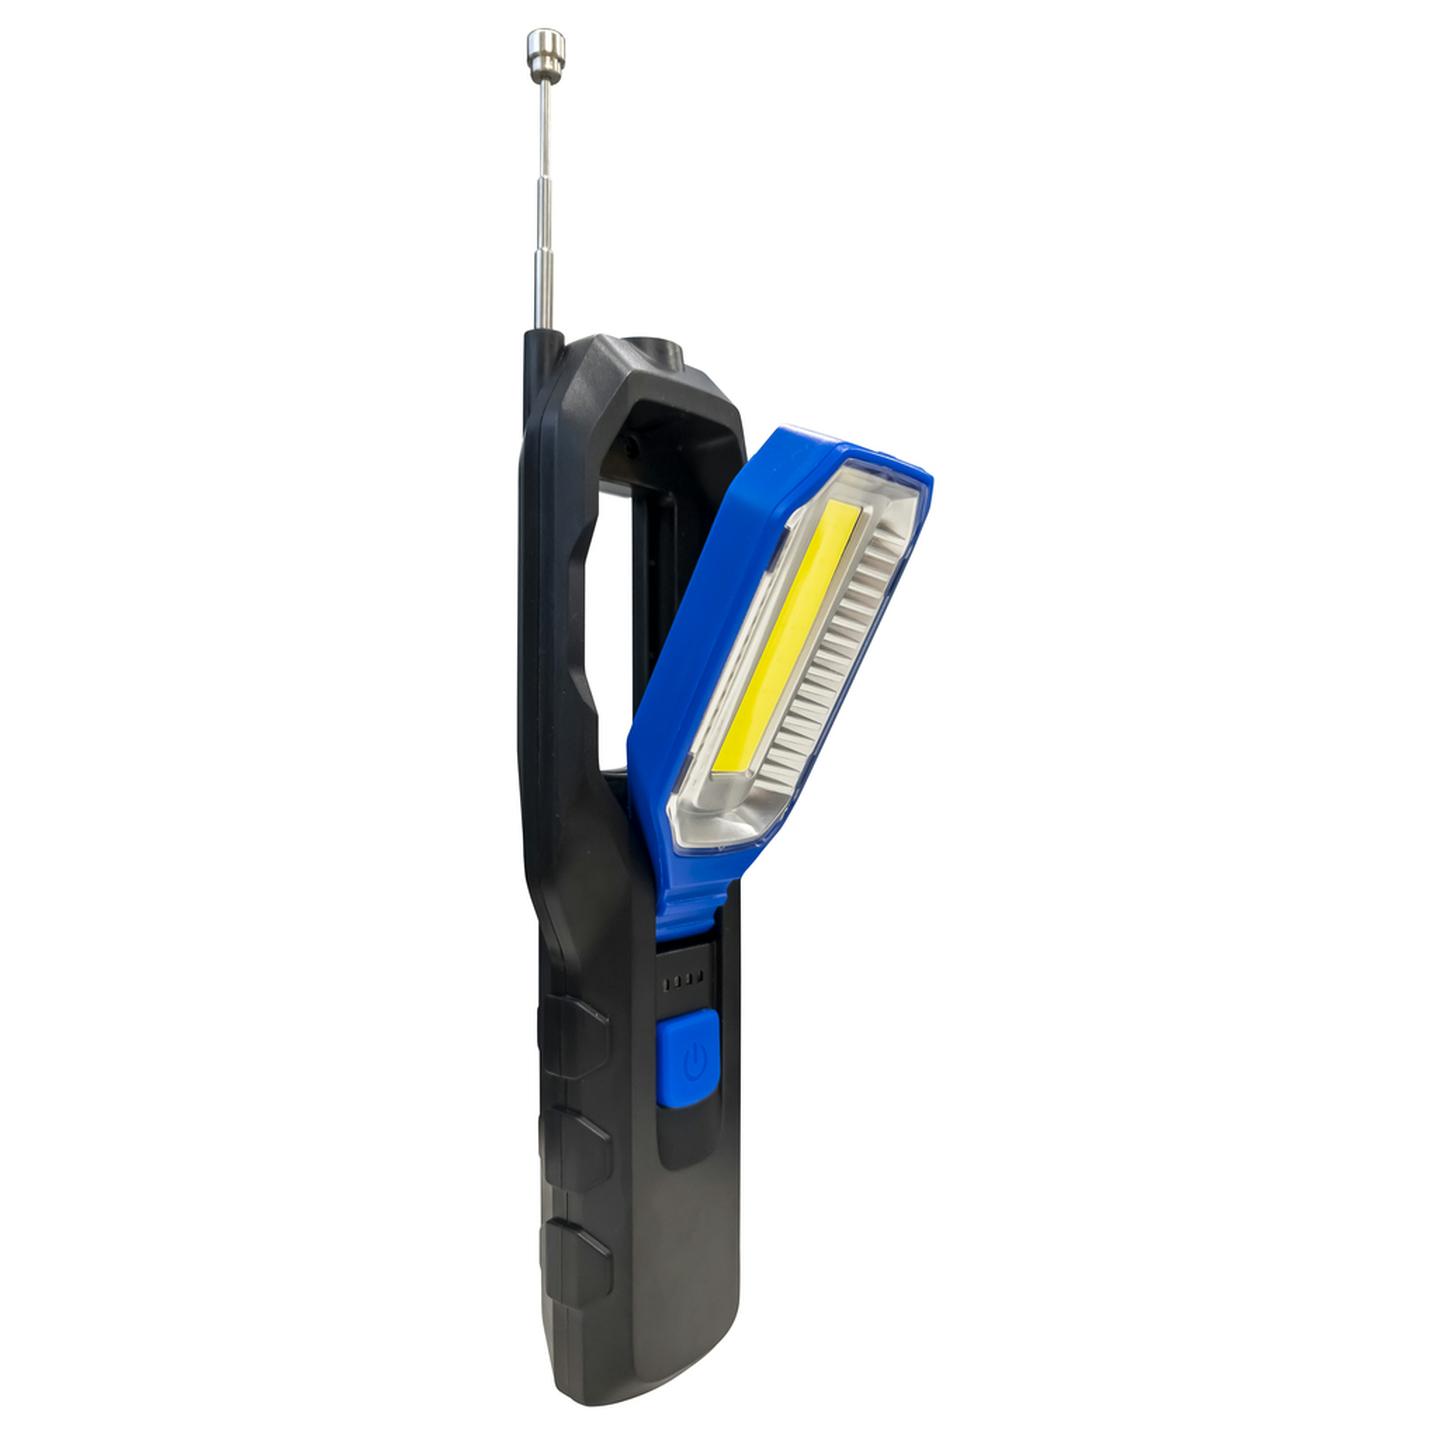 240 Lumen Rechargeable and Adjustable COB Worklight with Magnet Hook and USB Output